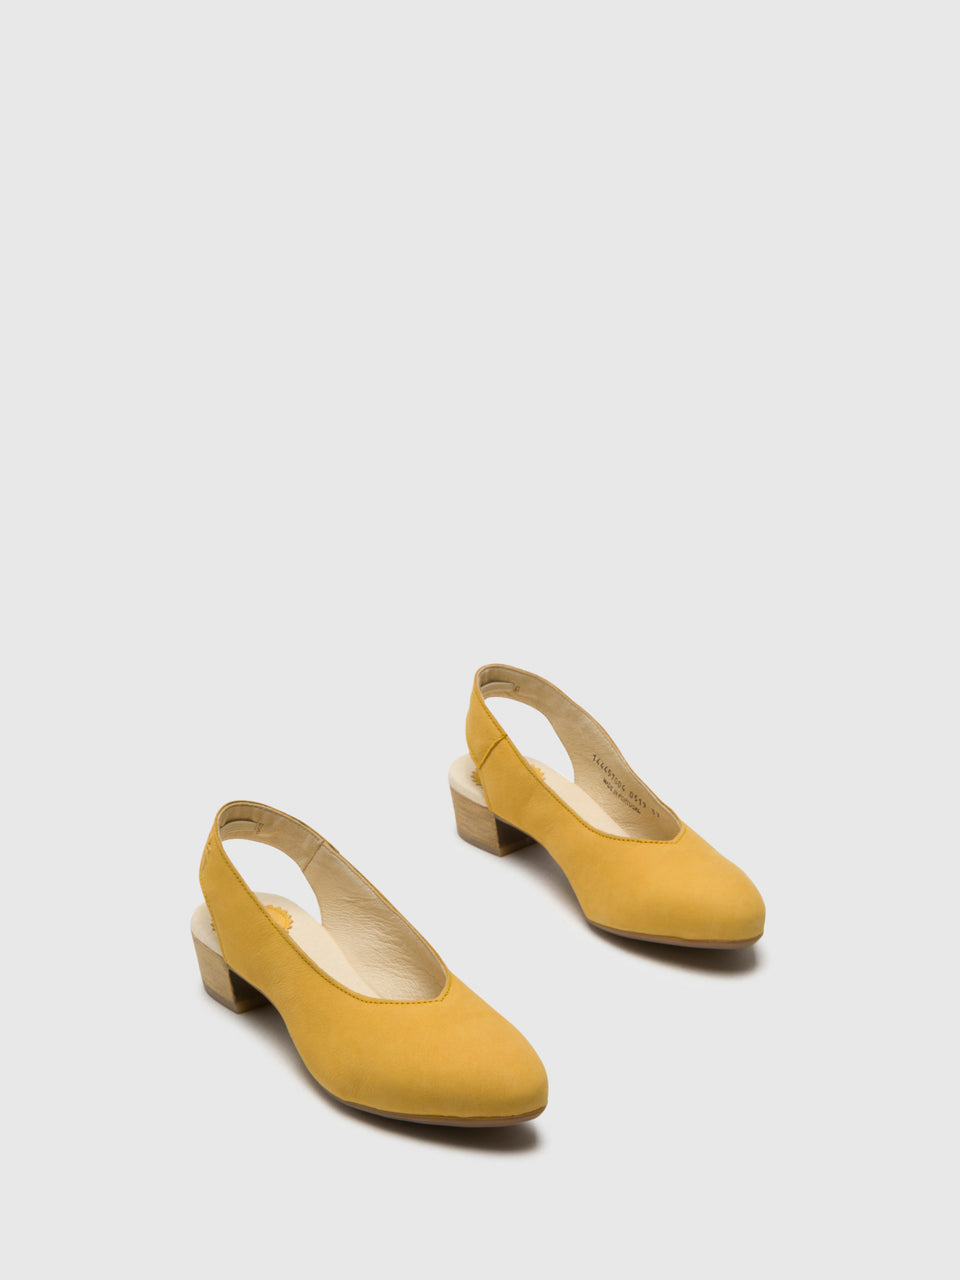 Fly London Yellow Sling-Back Pumps Shoes